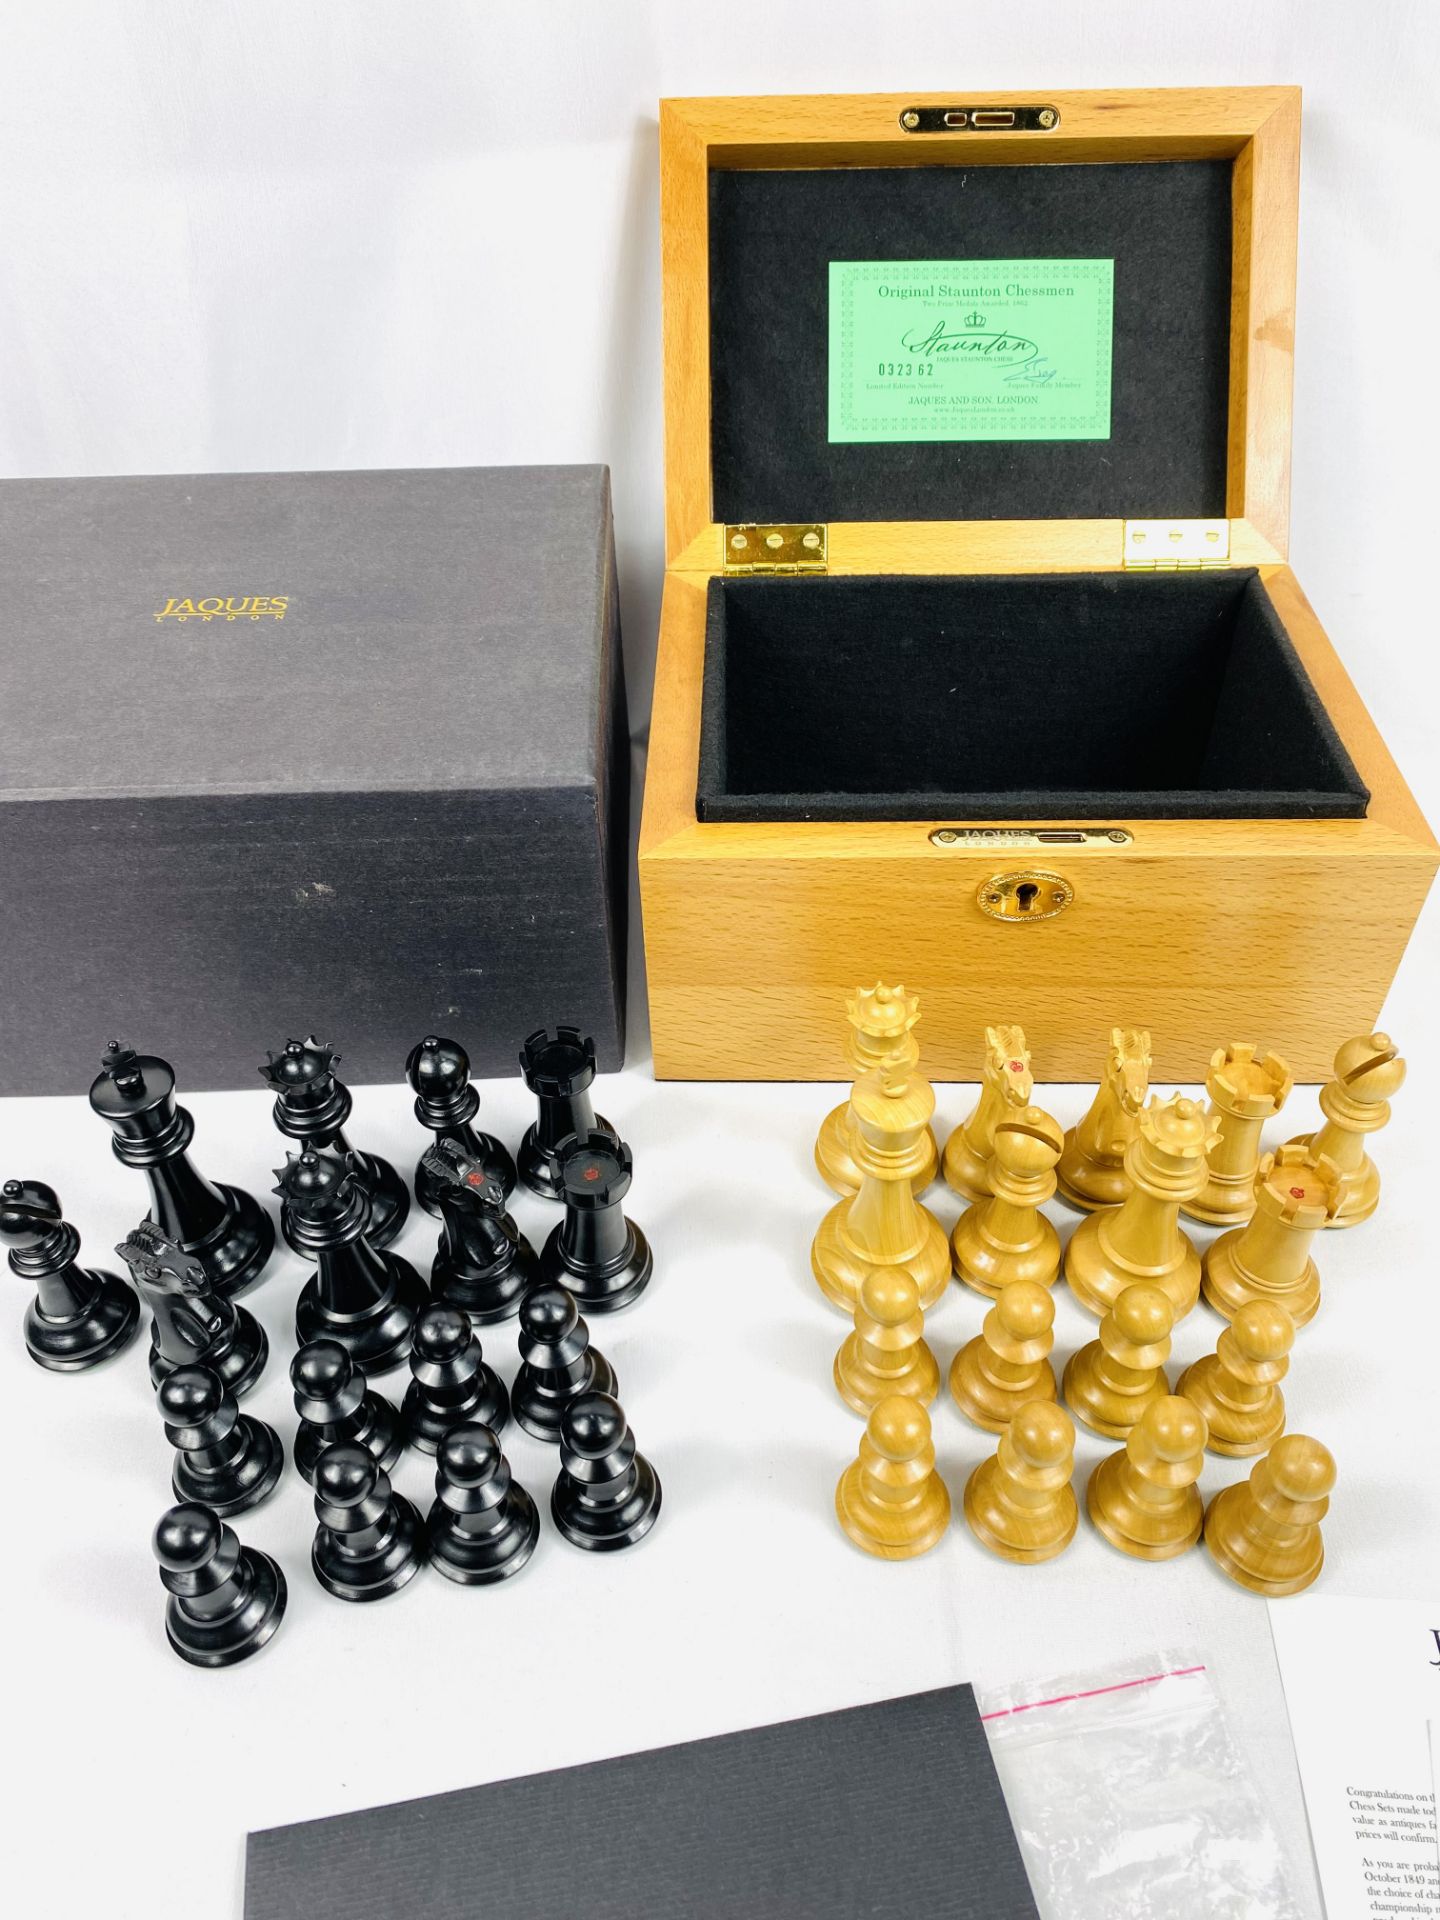 Jaques of London Staunton style chess set - Image 2 of 5